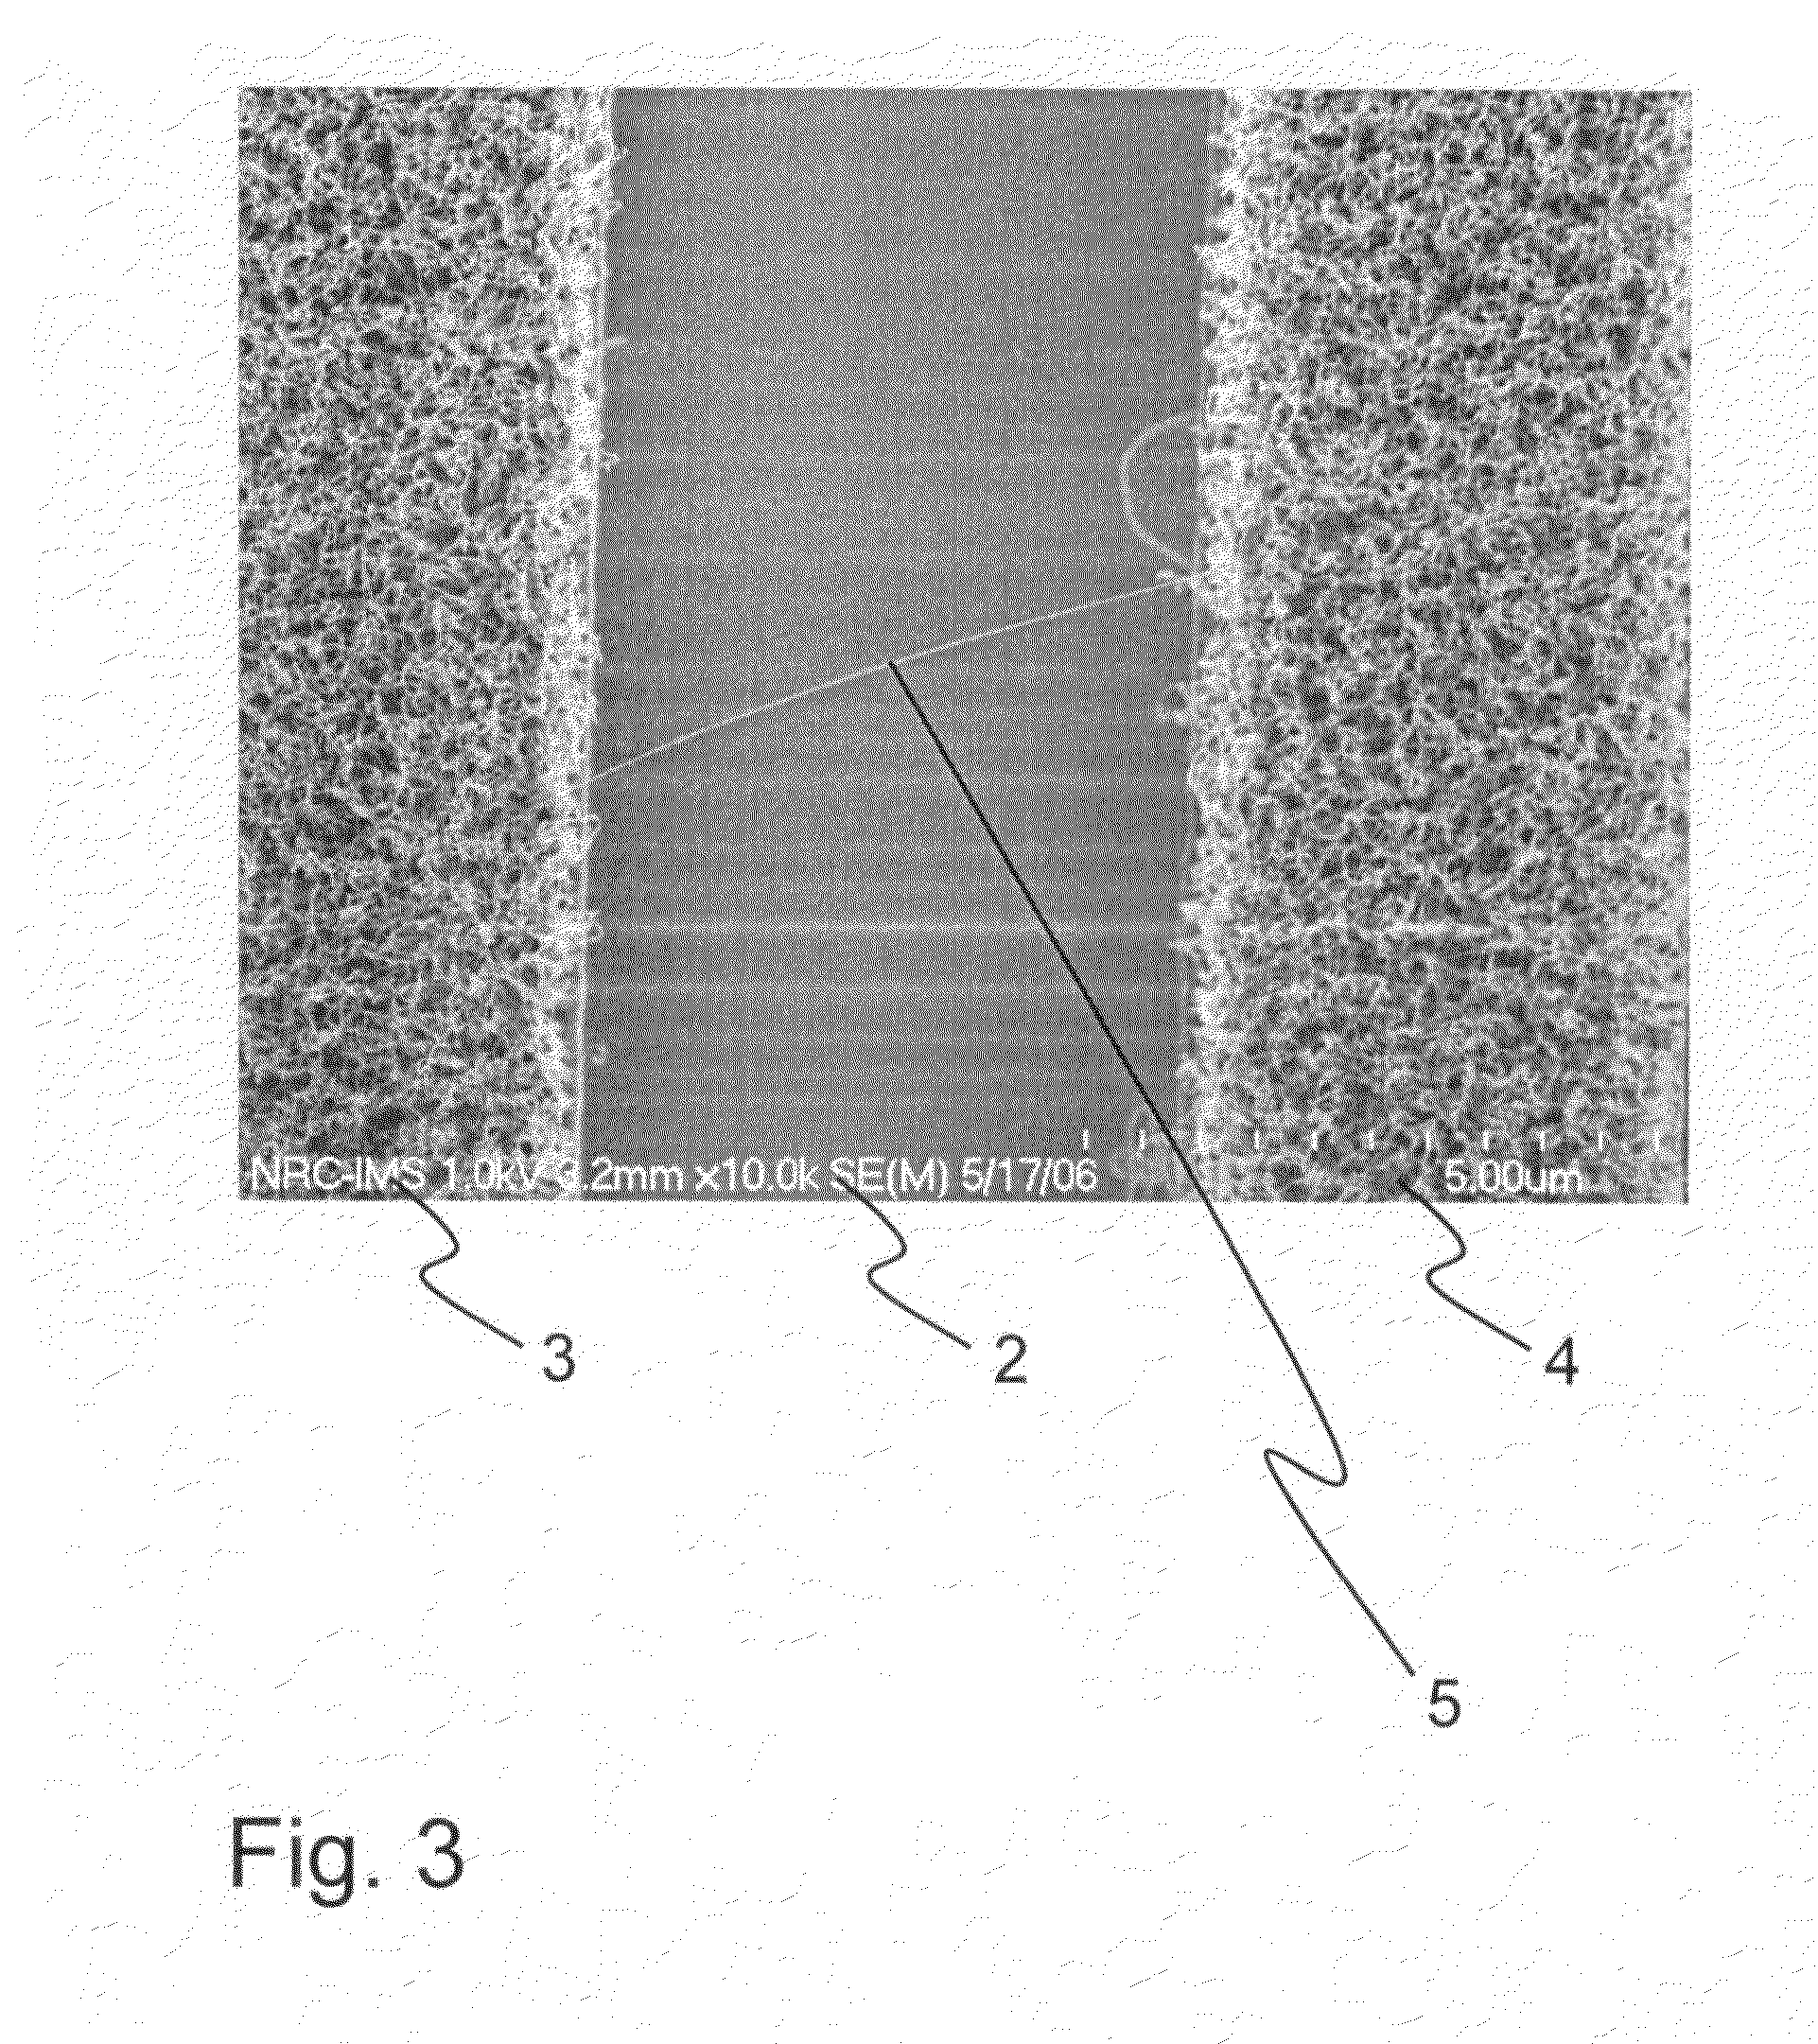 Carbon nanotube field effect transistor and method of making thereof